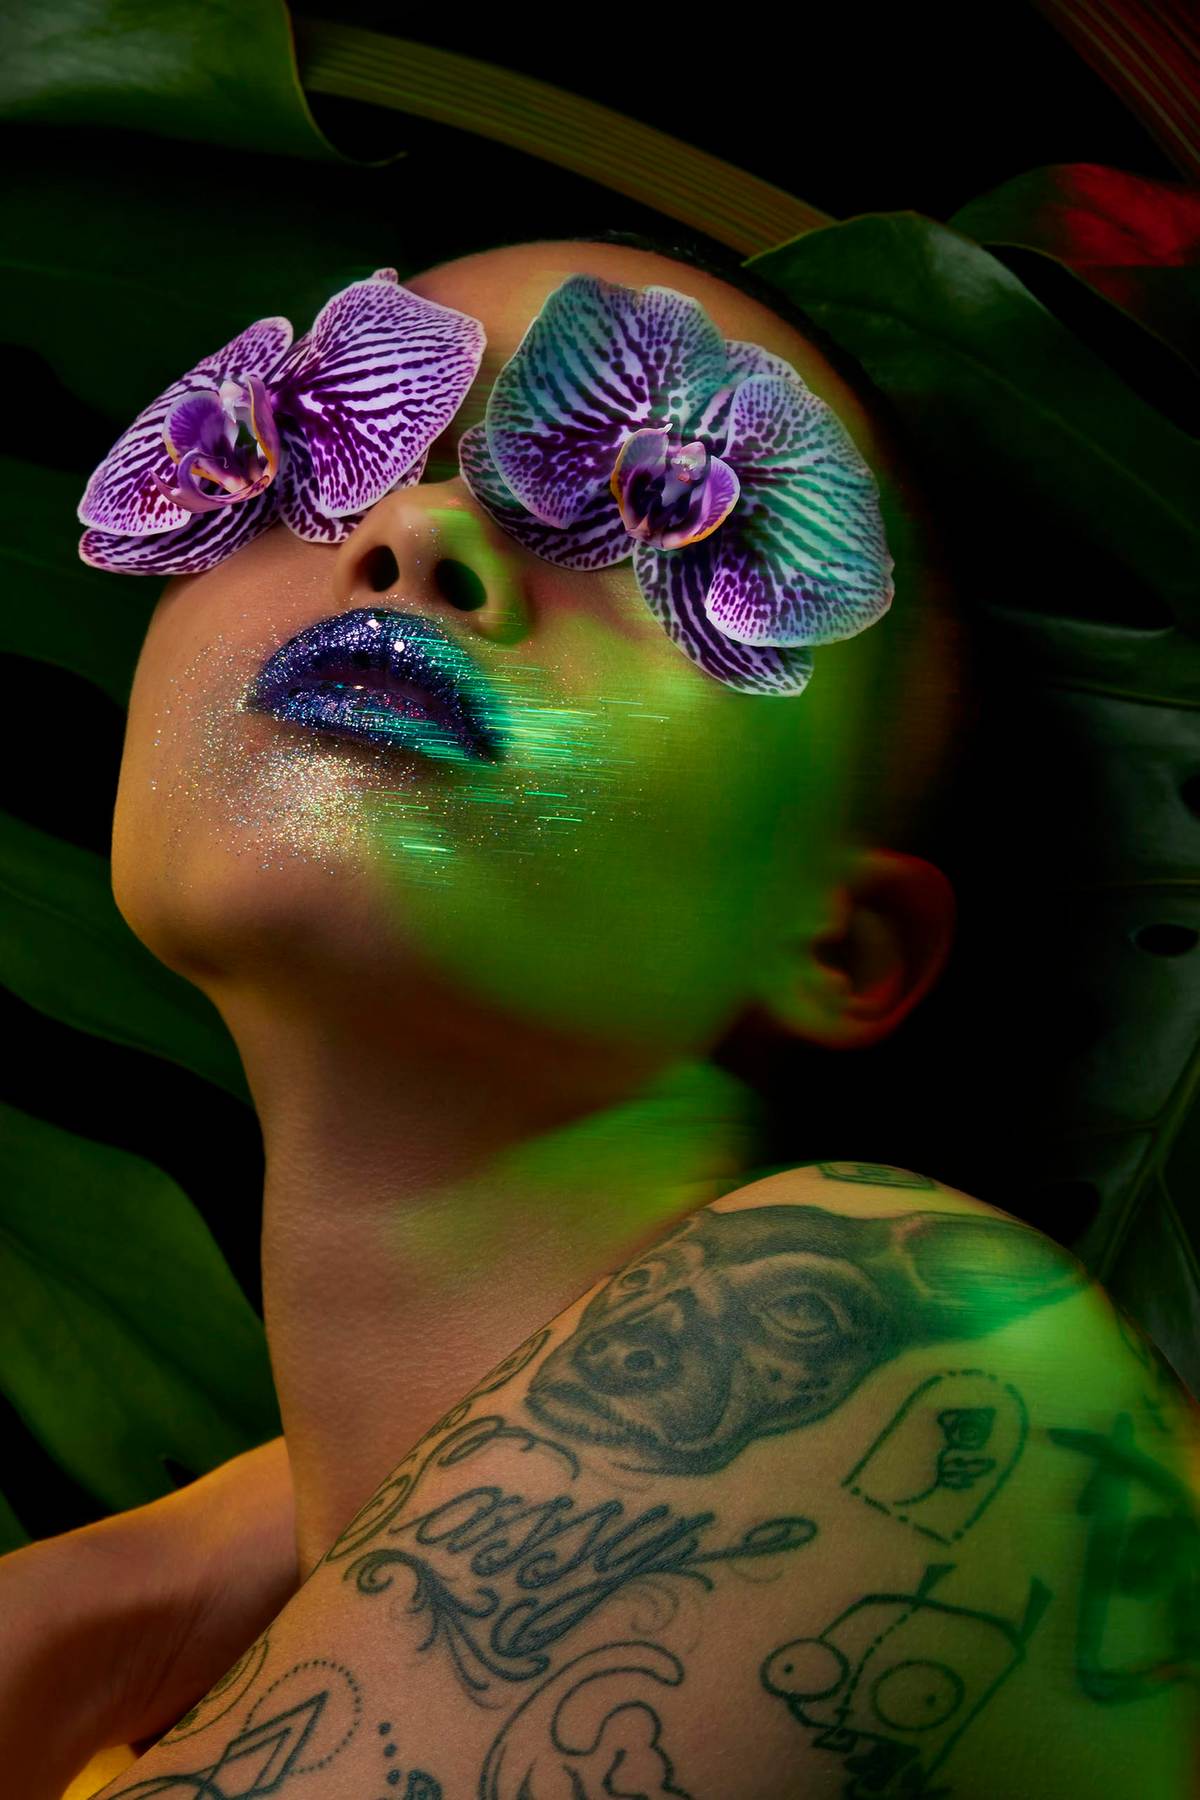 ORCHIDS_eyes_face_glitter_mouth_lips_african_american_green_tropical_beauty_dorit_Thies_Los_Angeles_B_closeup_DoritThies_0610 copy.jpg